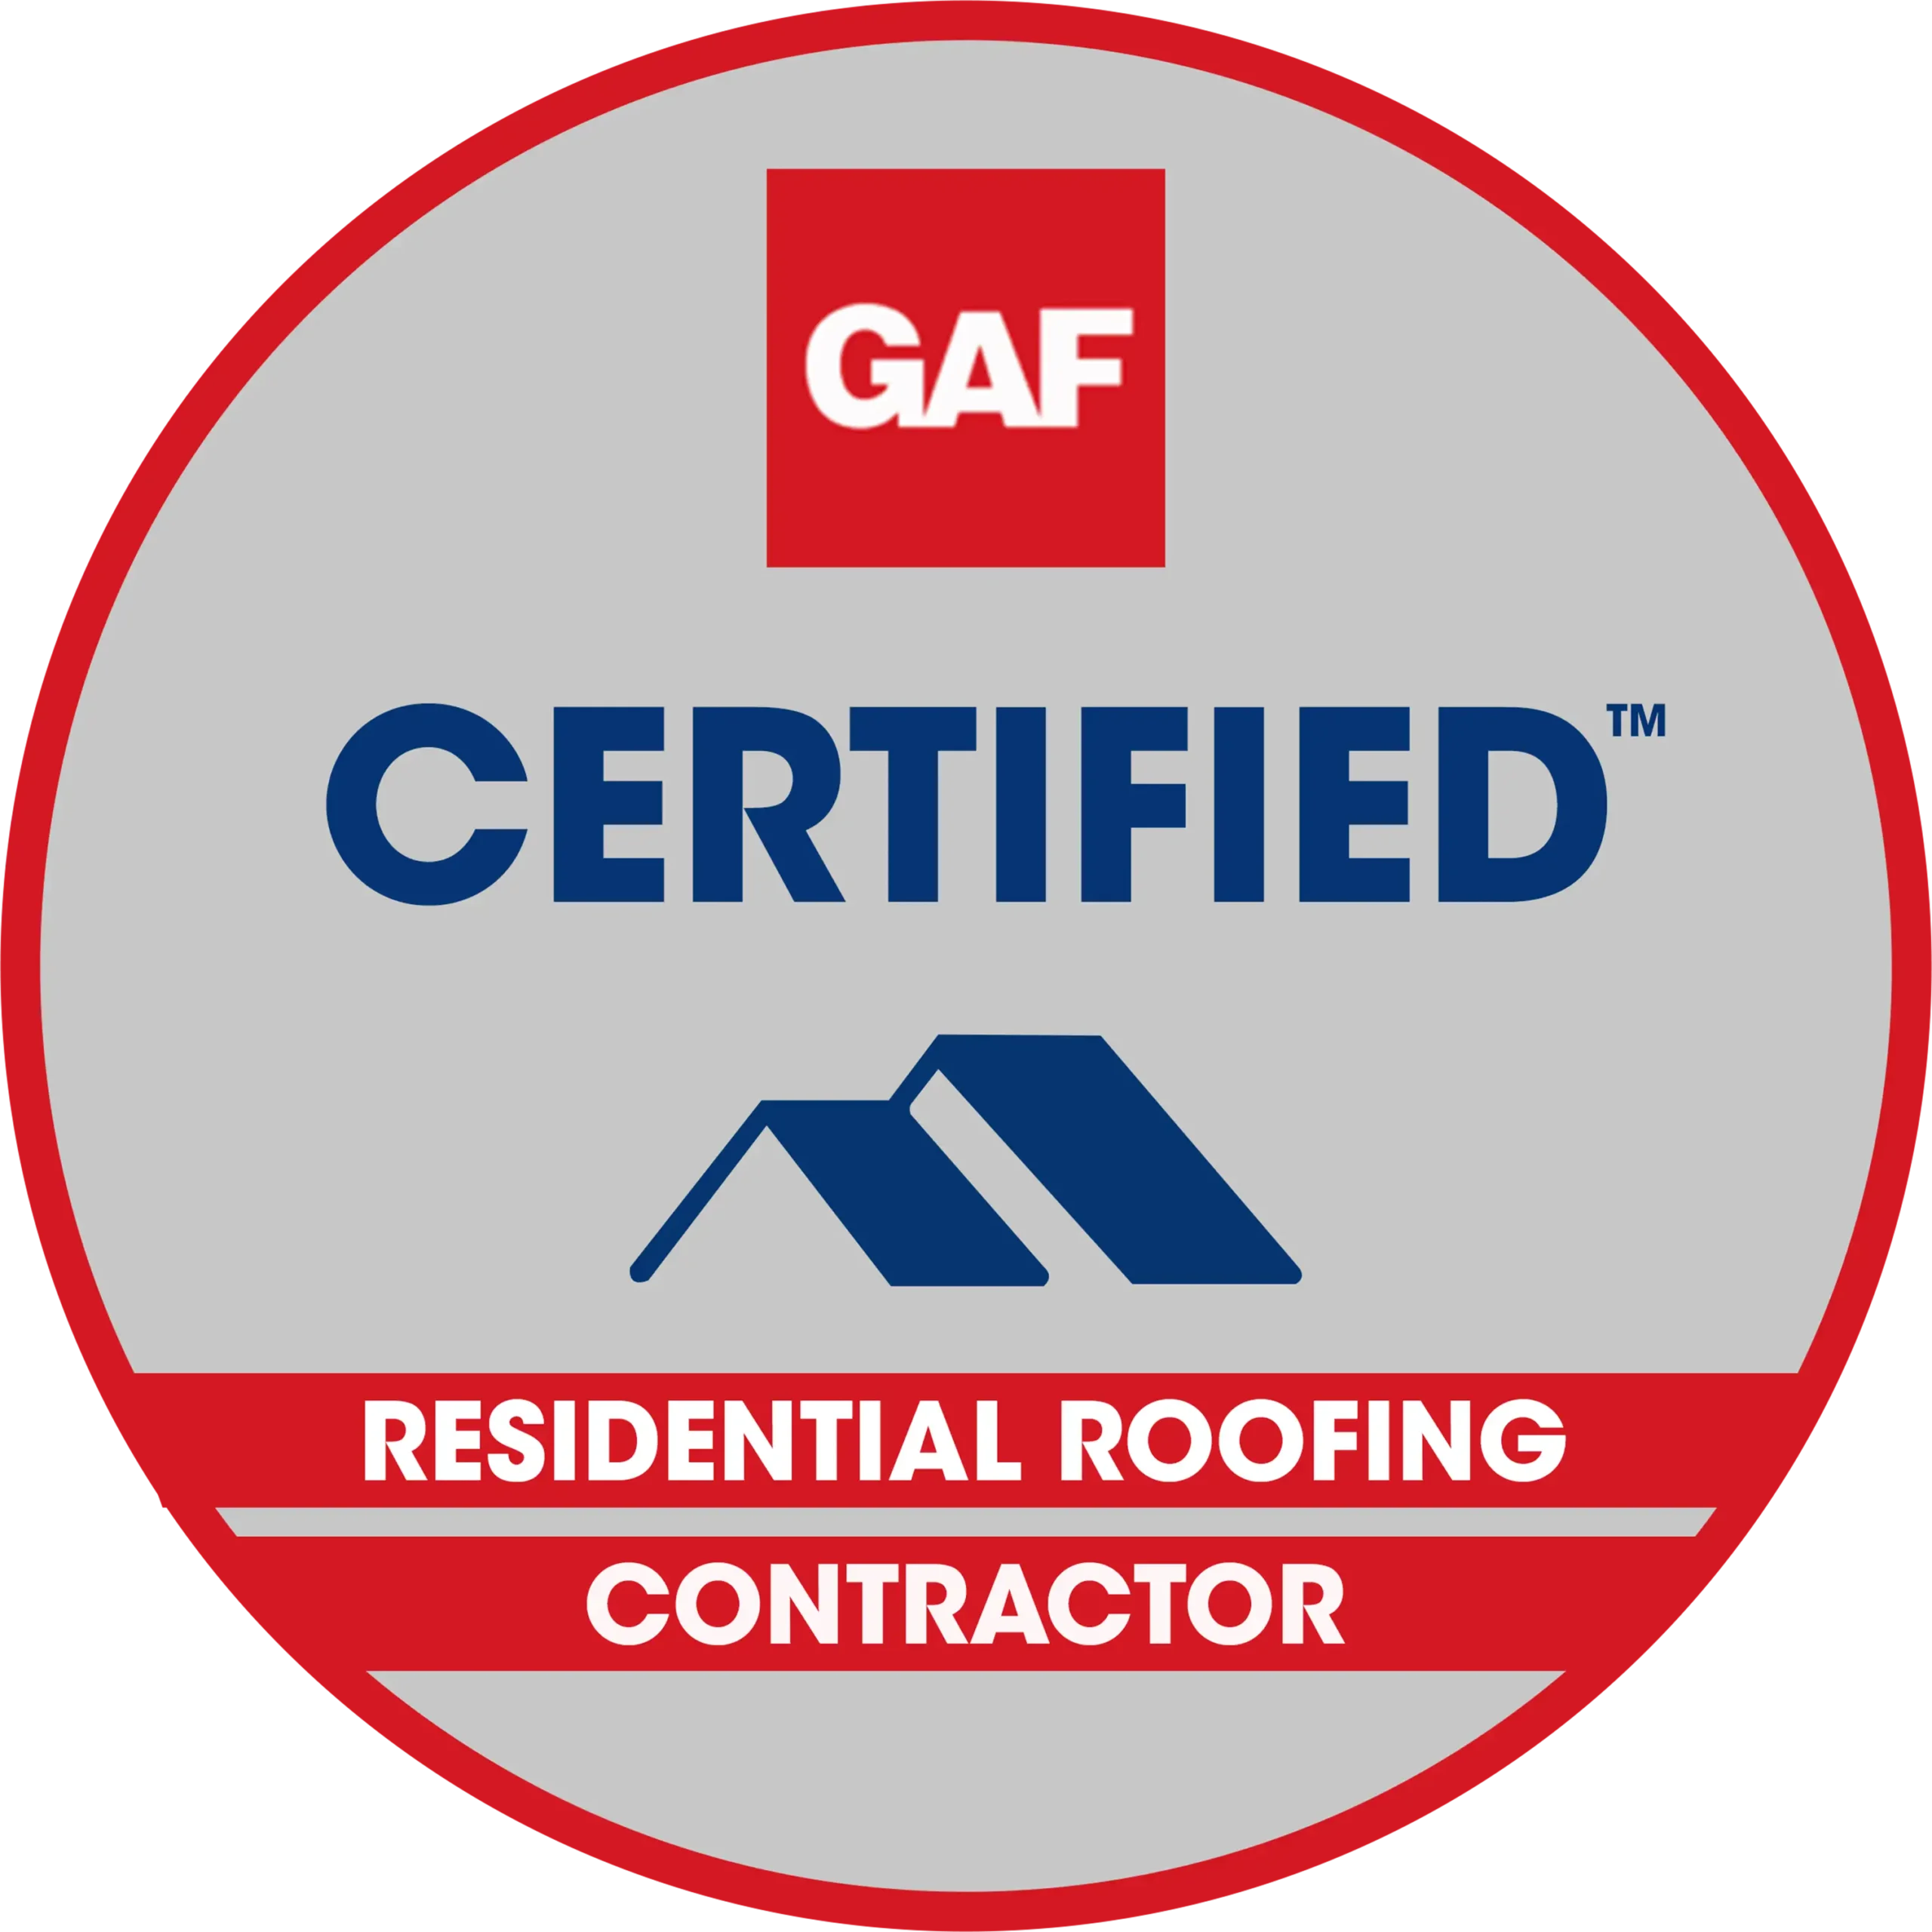 GAF certified residential roofing contractor